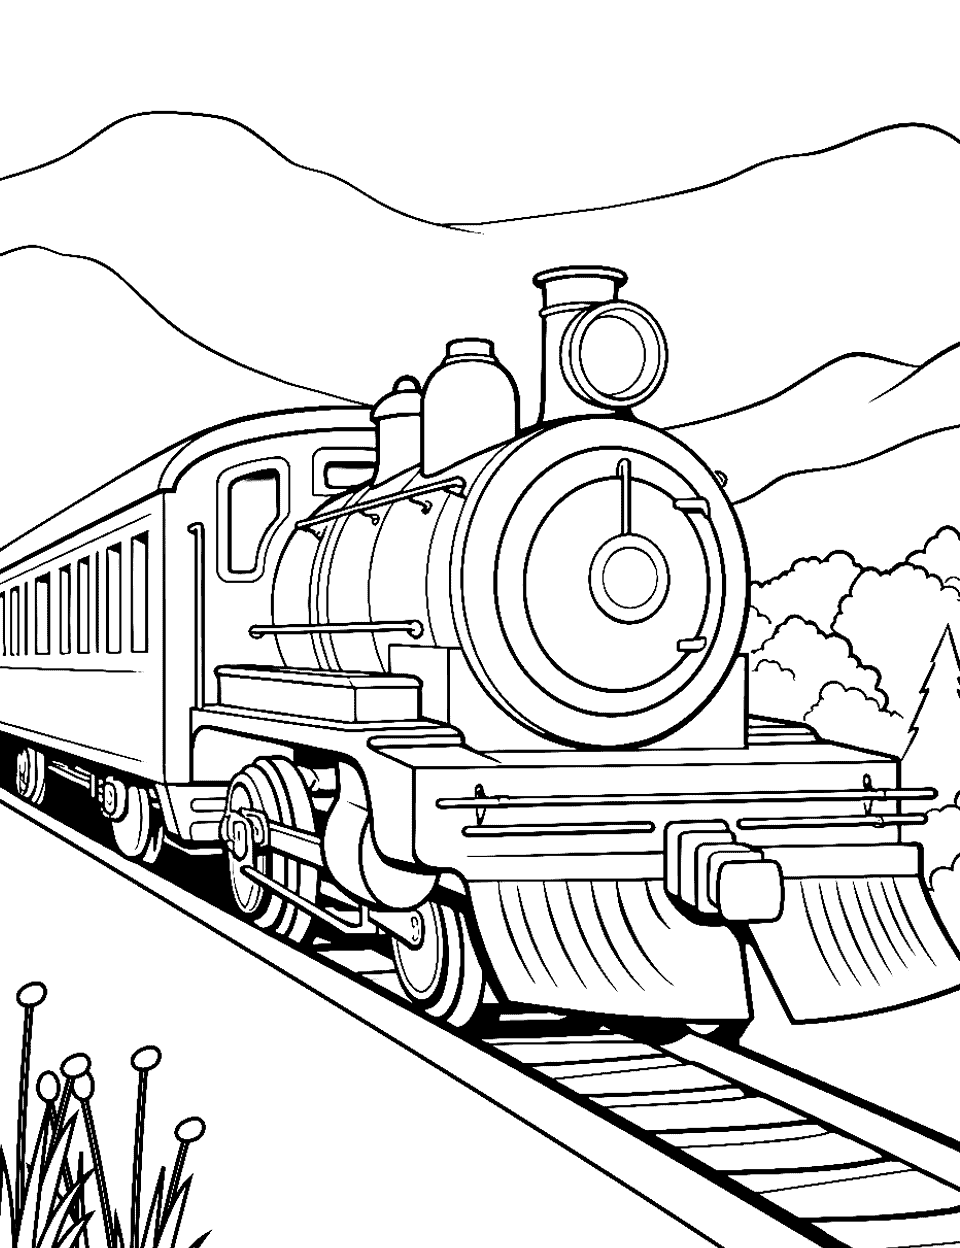 Passenger Train Journey Coloring Page - A long passenger train traveling through a gentle countryside.